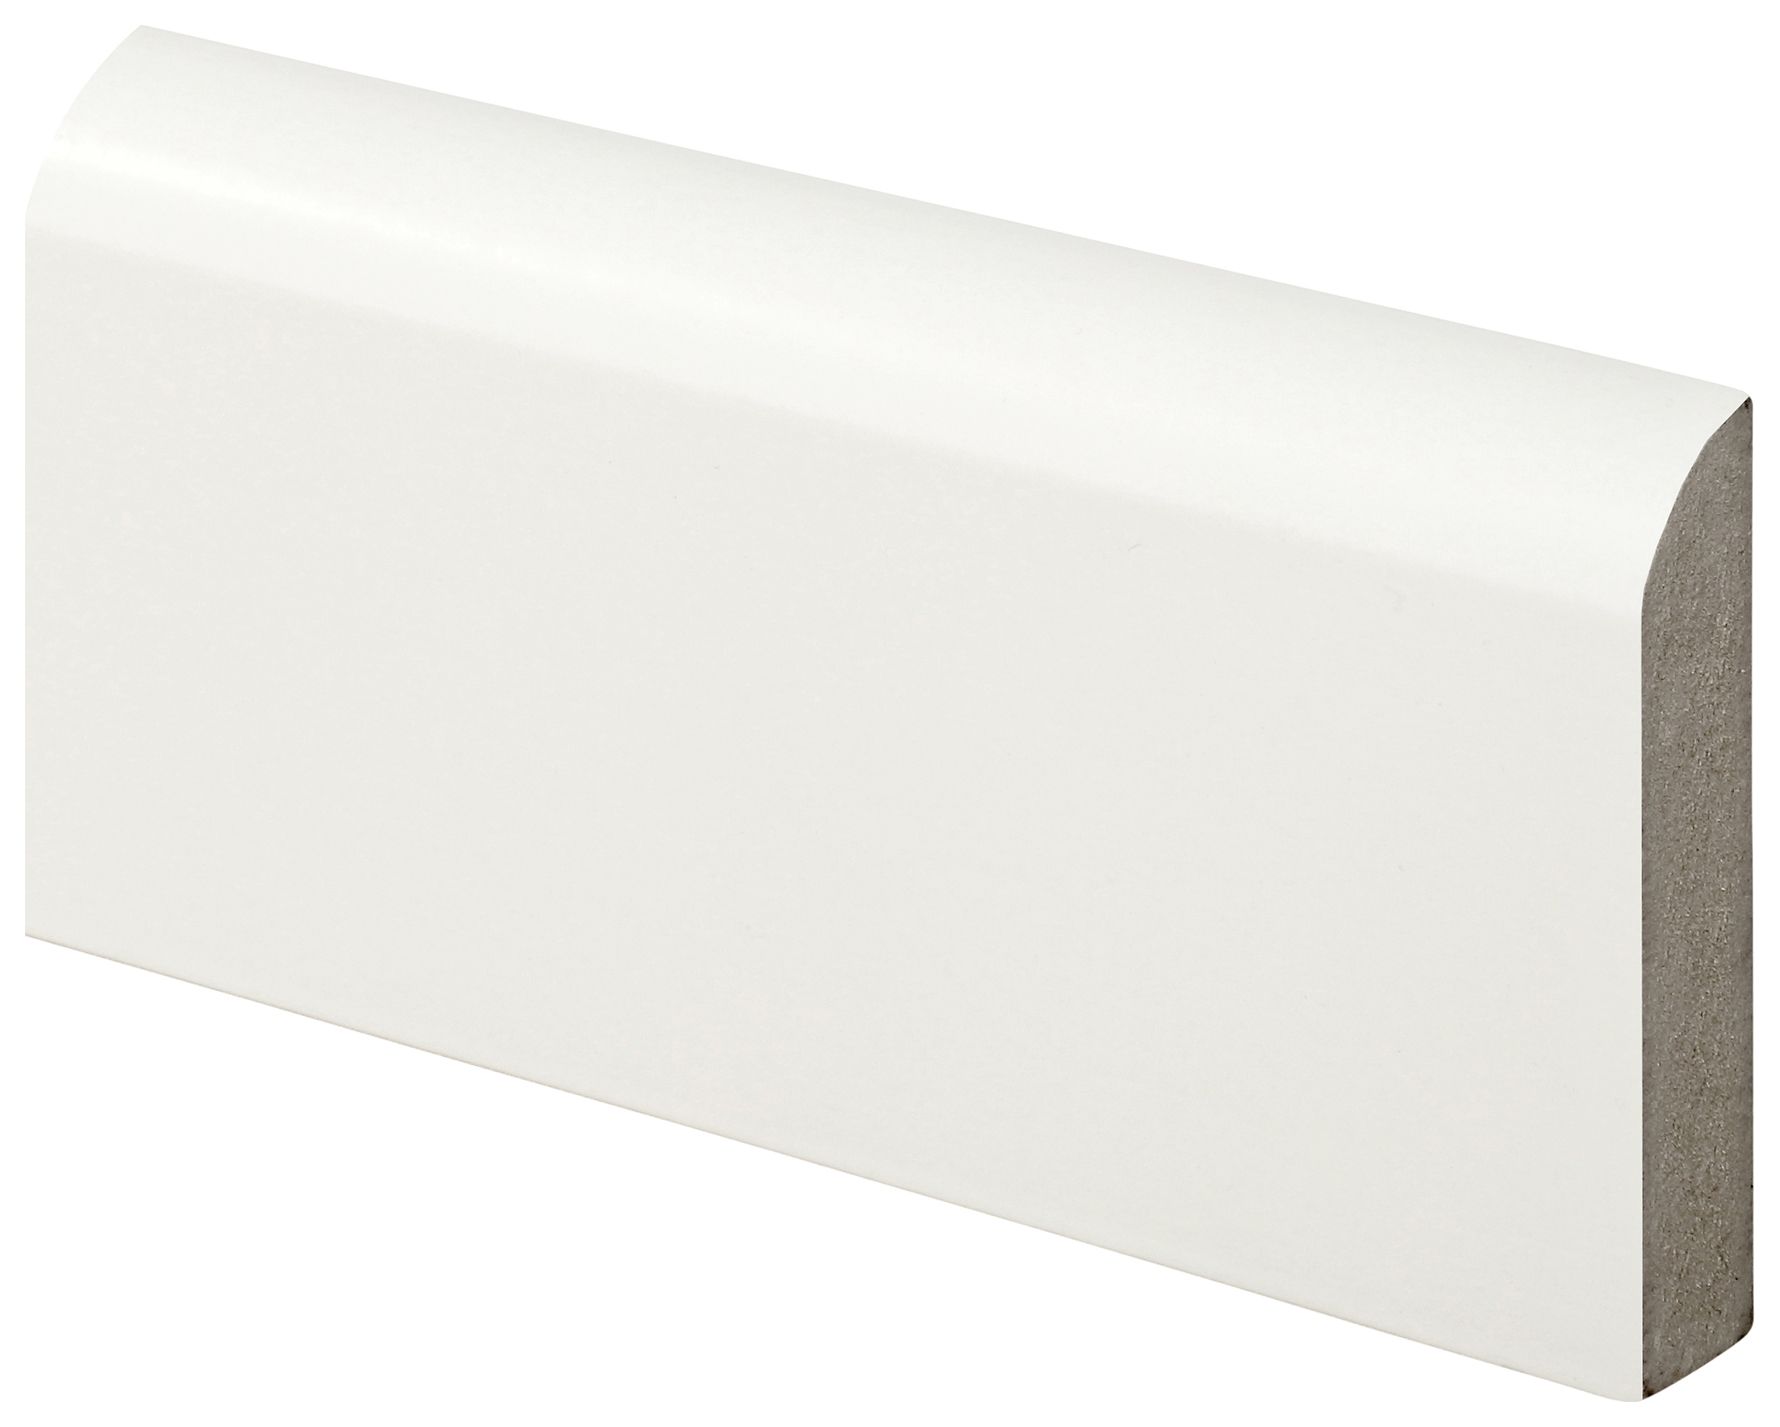 Image of Wickes Bullnose Fully Finished Architrave - 18 x 69 x 2100mm Pack of 5